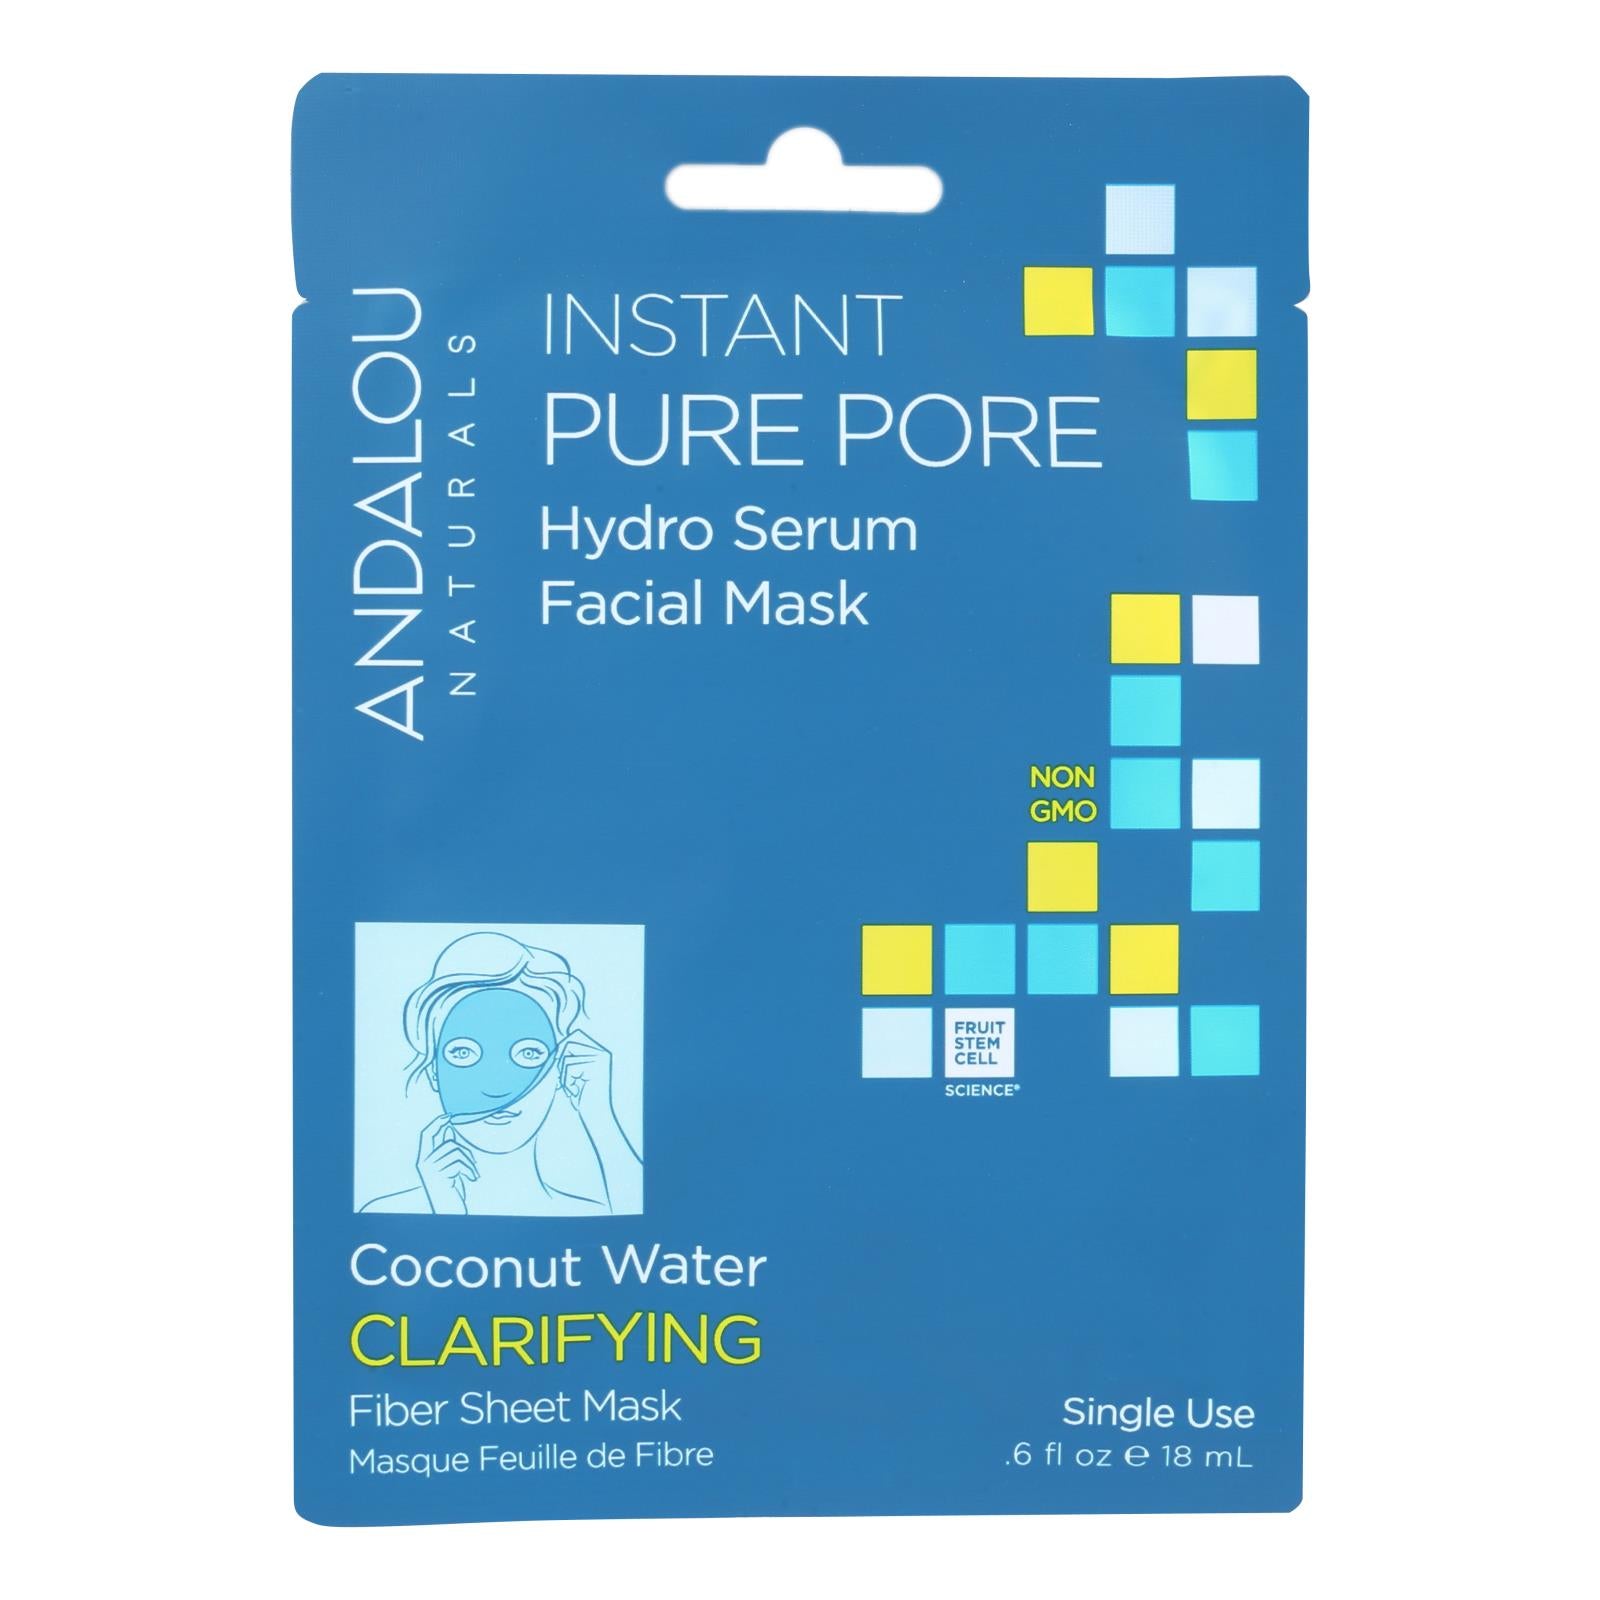 Andalou Naturals, andalou Naturals Instant Pure Pore Facial Mask - Coconut Water Clarifying - Case of 6 - 0.6 fl oz (Pack of 6)